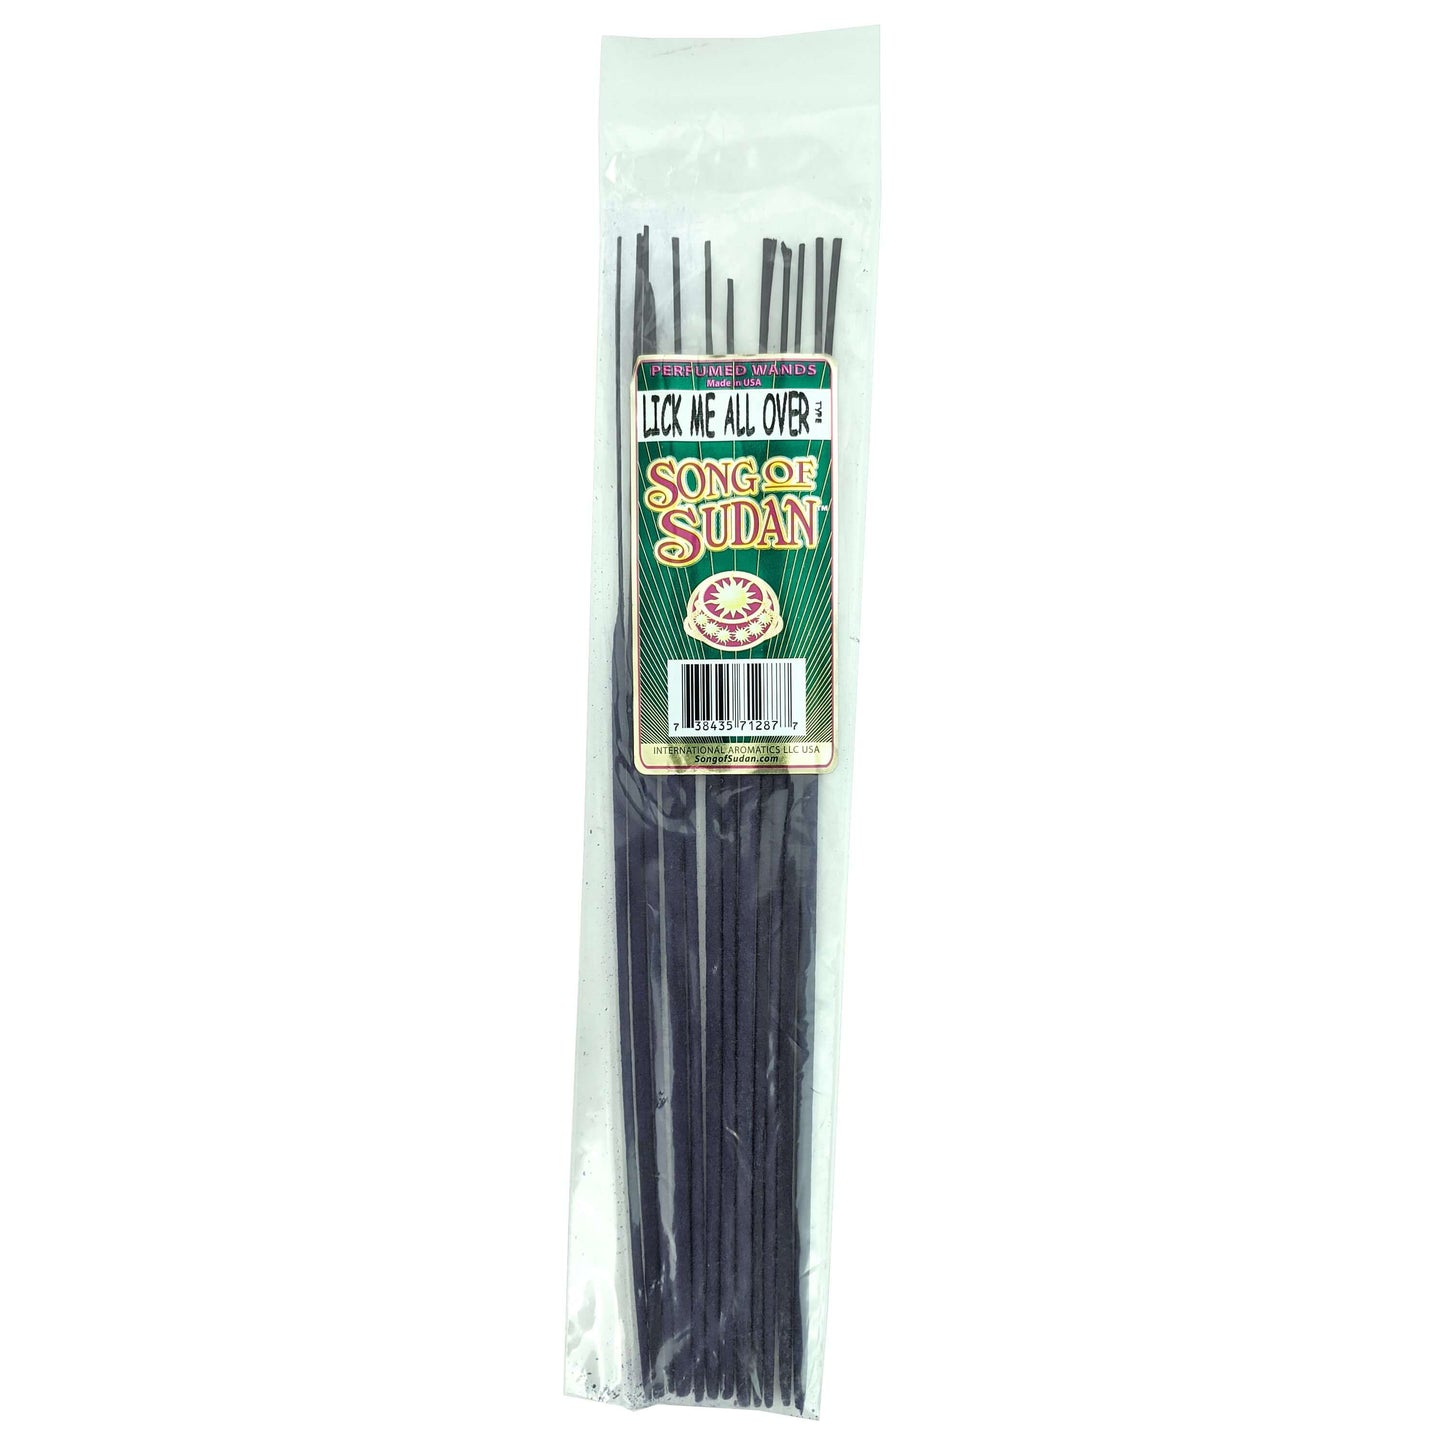 Song Of Sudan Handmade 11" Incense Sticks - Lick Me All Over Type Scent - 12 Sticks